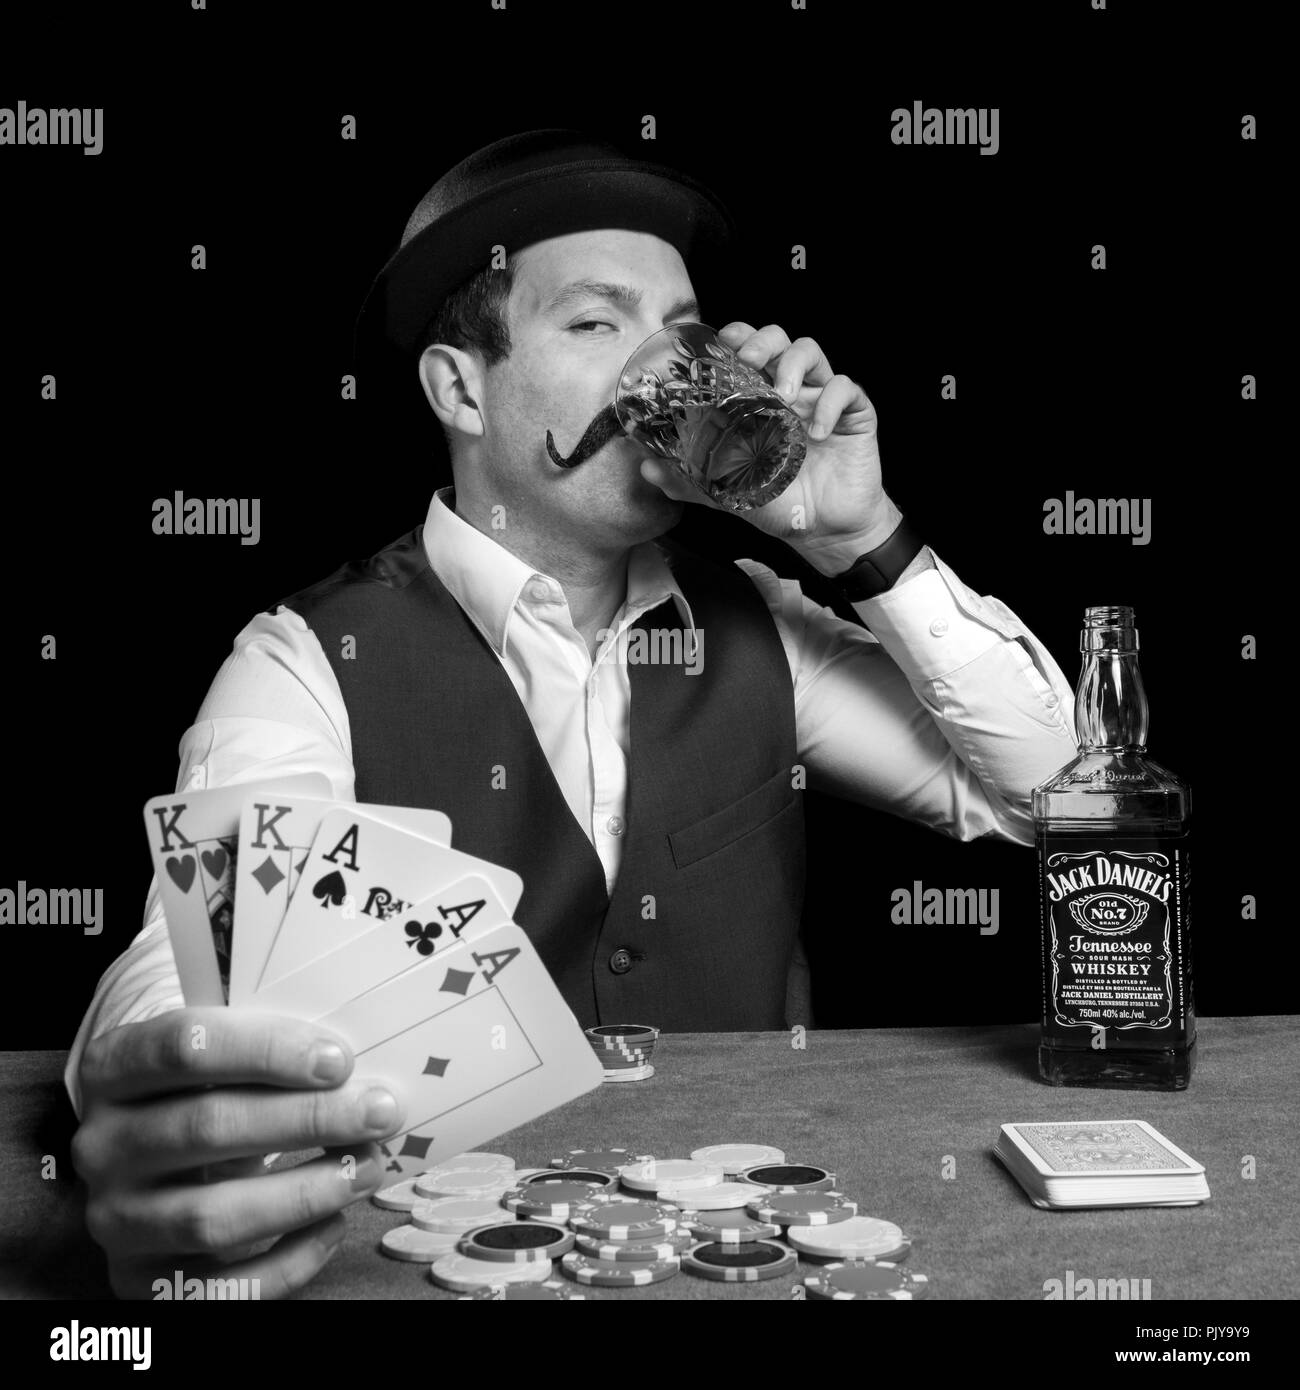 Man with melon hat drinking alcohol and winning a game of poker jack daniel's playing cards game funny fake vintage photography Stock Photo